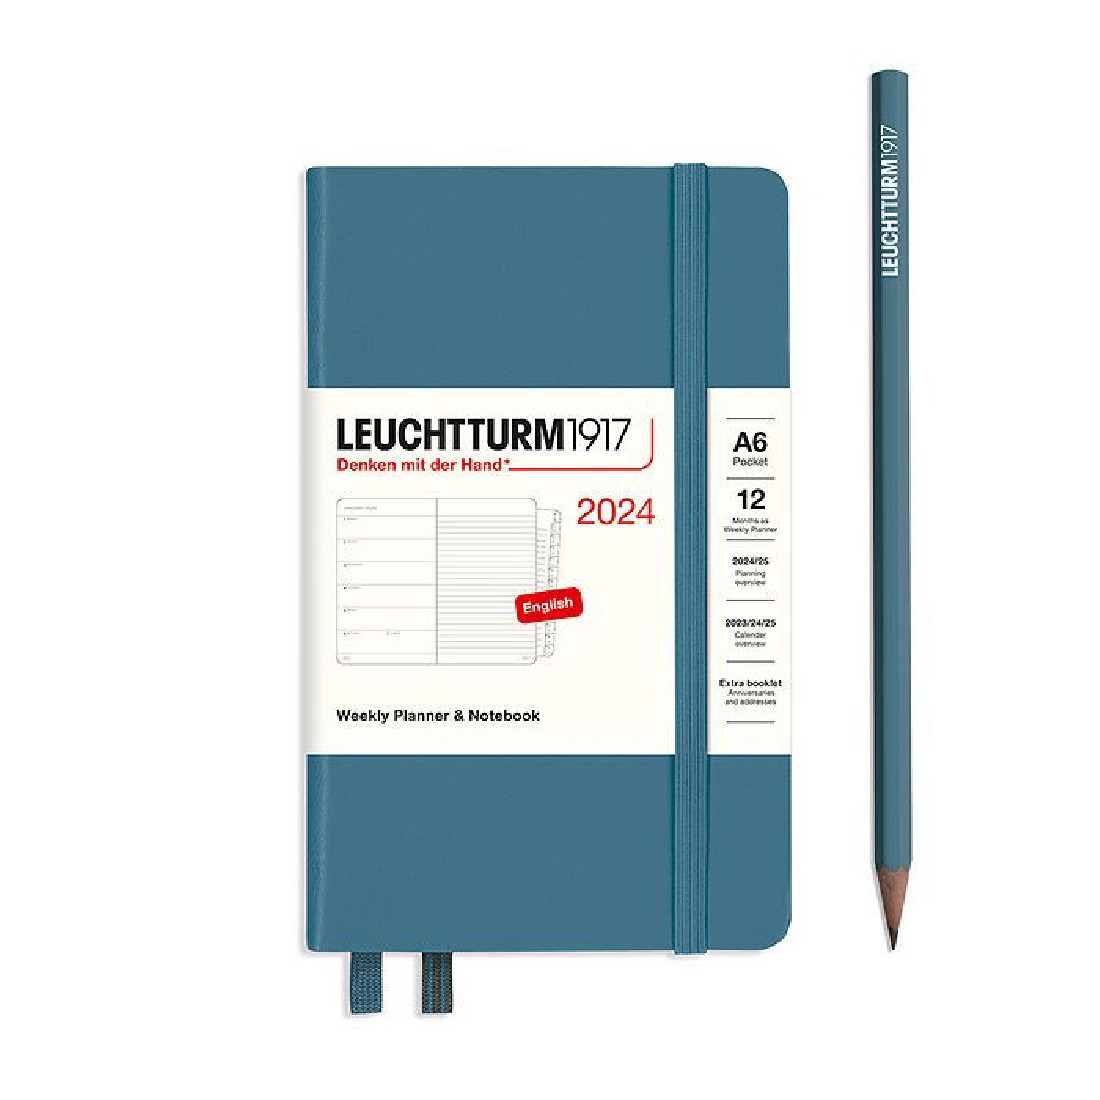 Leuchtturm 1917 Weekly Planner and Notebook 2024 Stone Blue Pocket A6